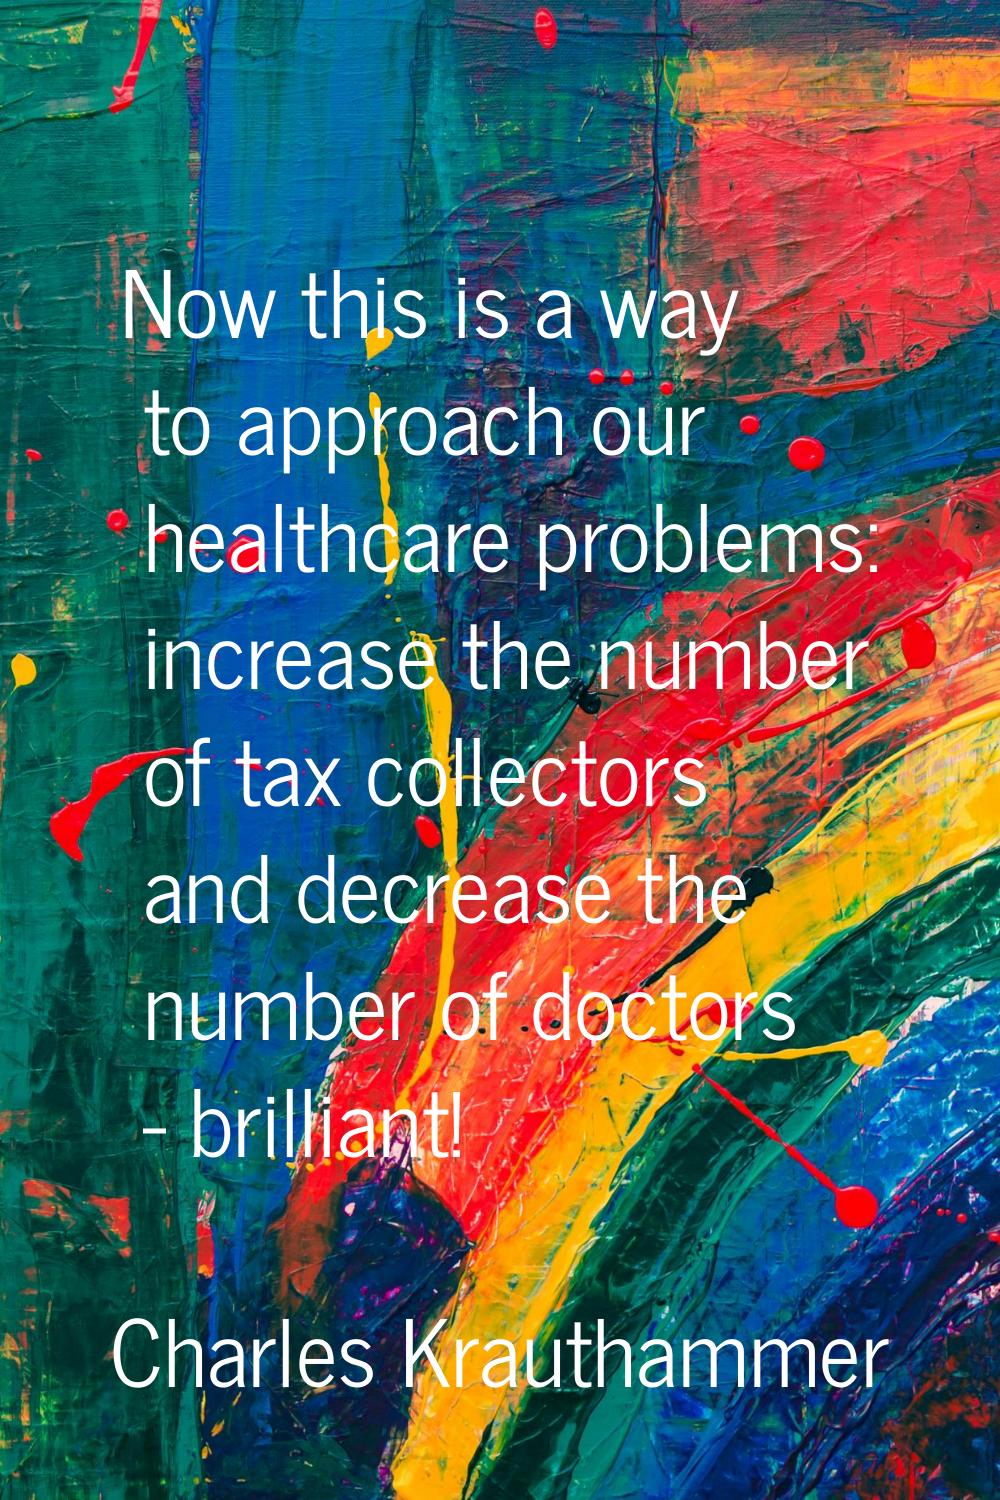 Now this is a way to approach our healthcare problems: increase the number of tax collectors and de